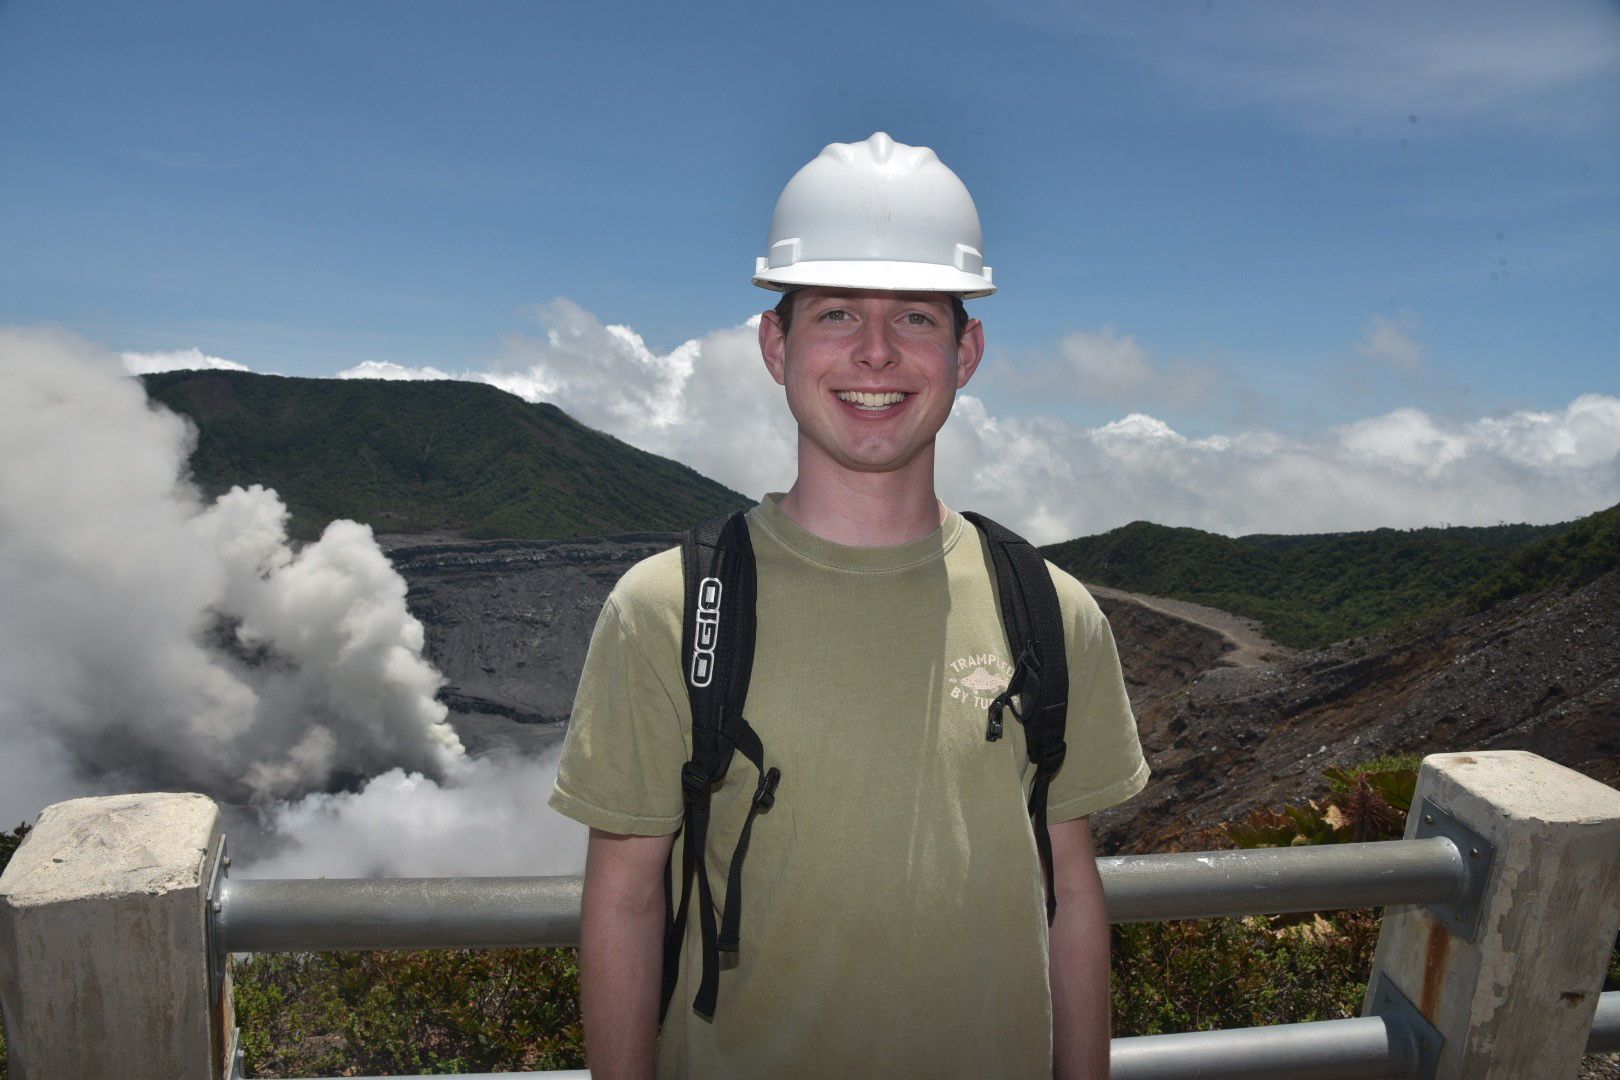 Paddy in front of a volcano wearing a white hard hat